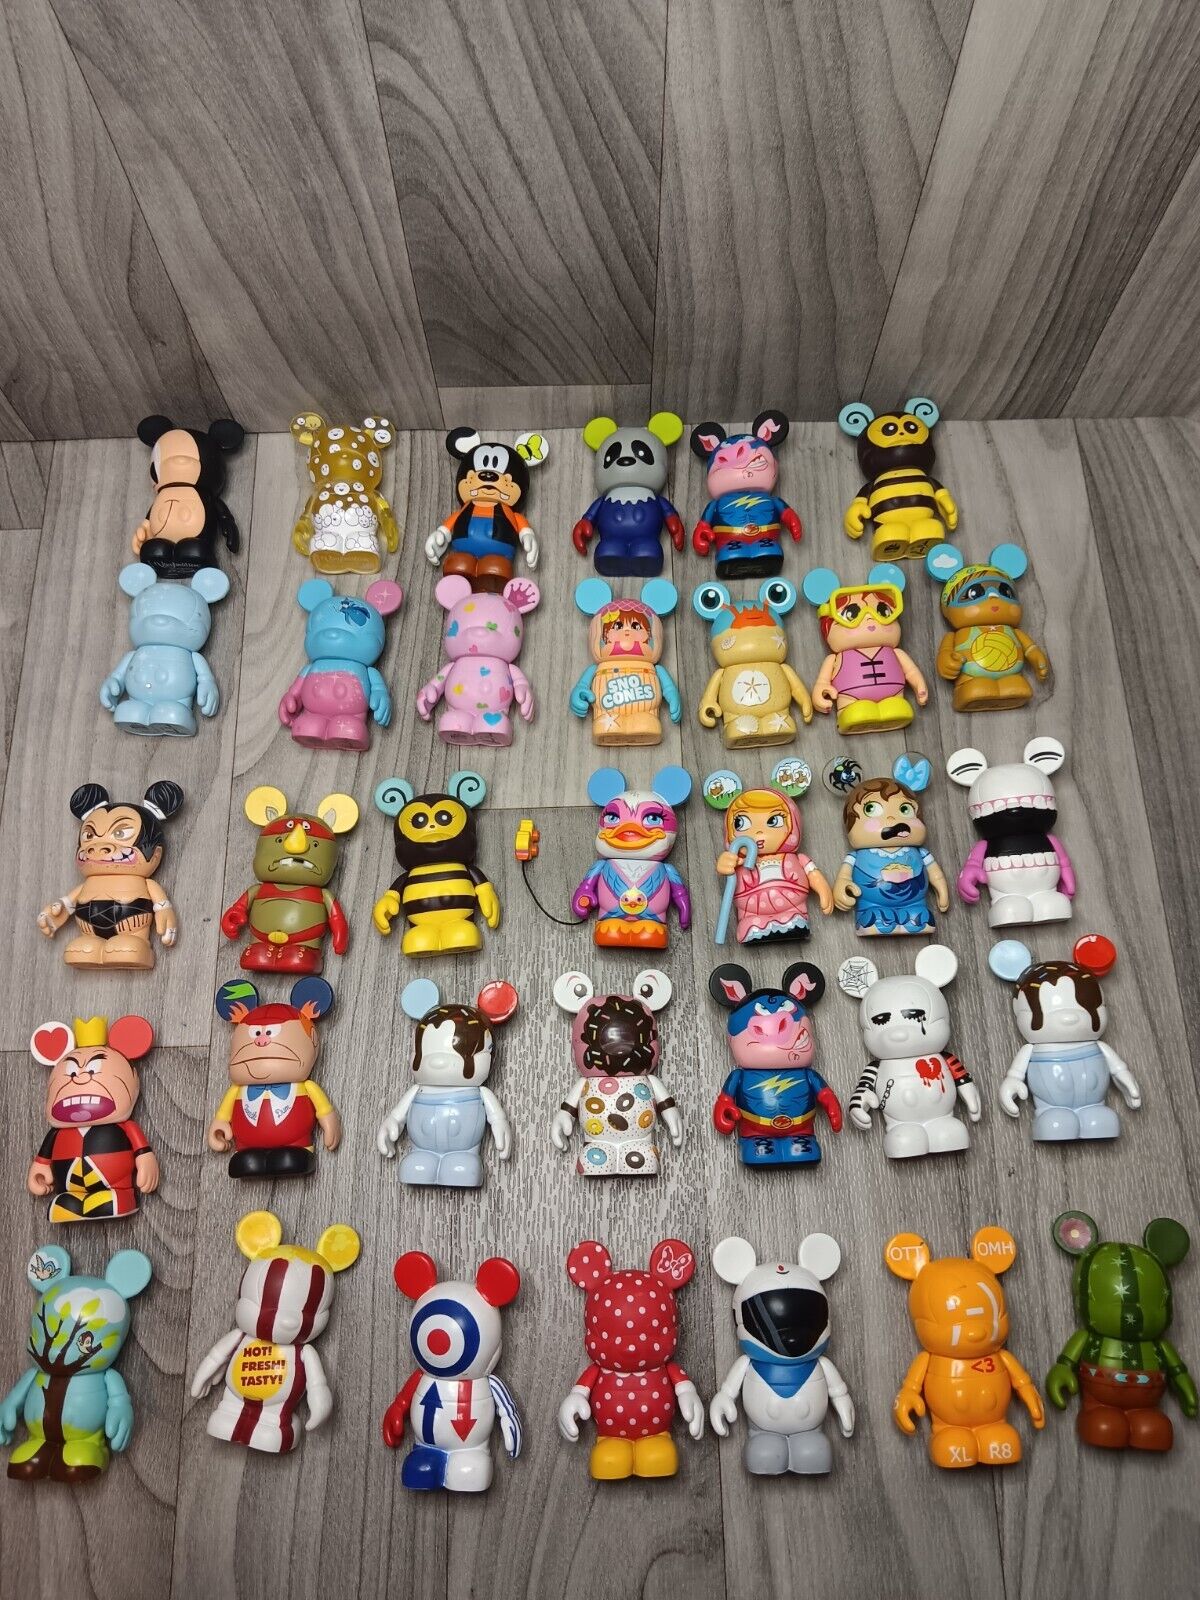 Disney Vinylmation Lot of 34 Figures from Various Series Disney Parks 3 inches